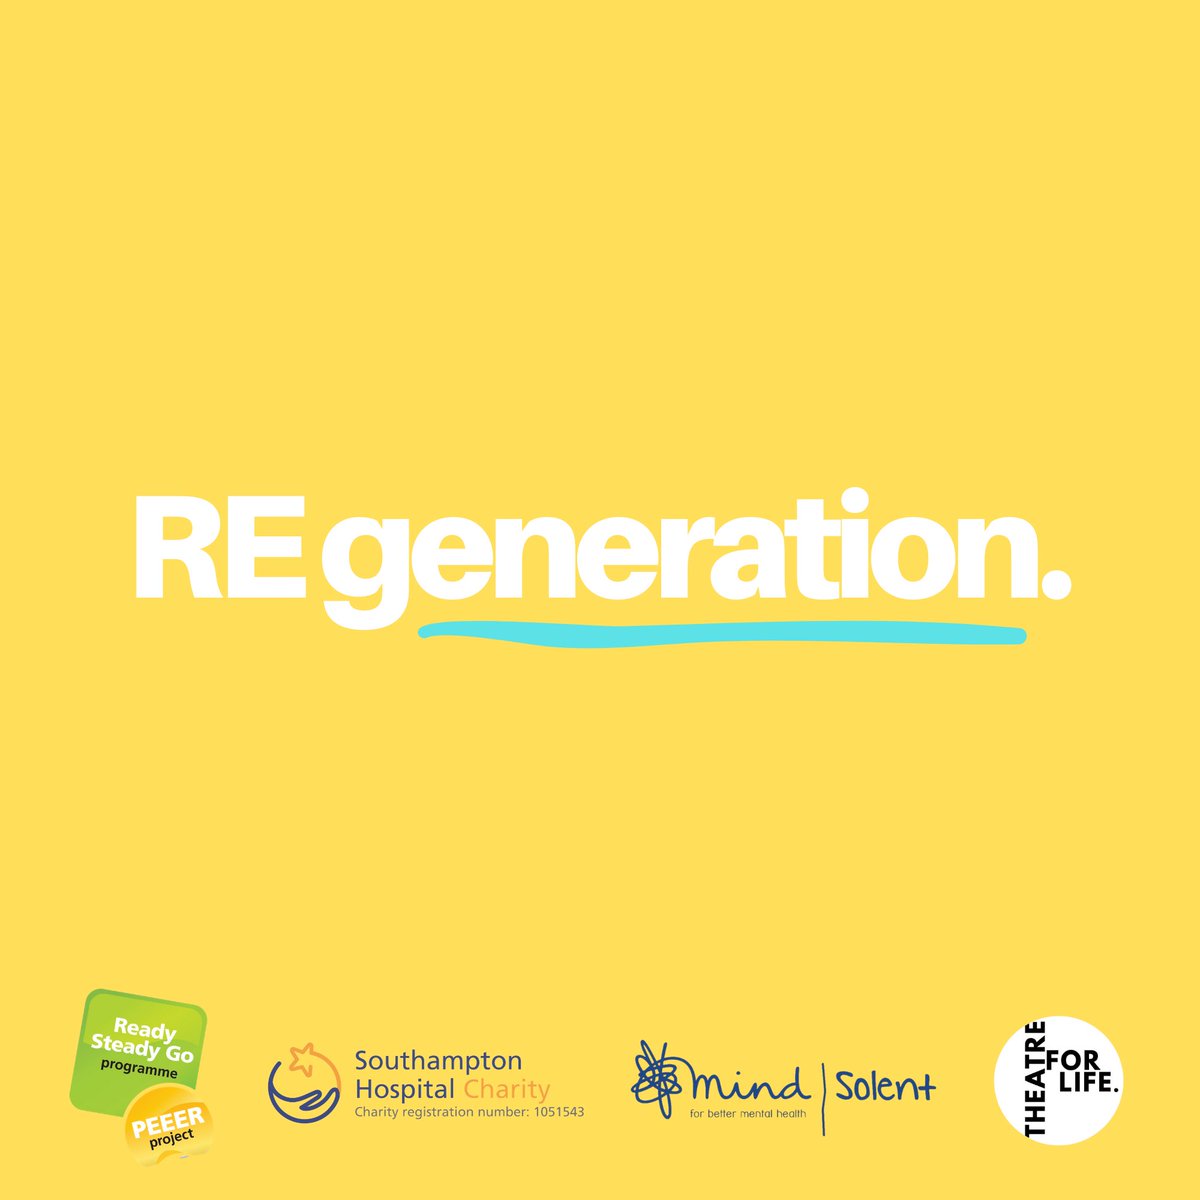 We‘re delighted to join other incredible  projects helping to support communities ‘thrive’ through social prescribing programmes.
Thank you  @NASPTweets & @ace_national for our Thriving Communities Fund  #REgeneration #NationalSocialPrescribingDay #YoungPeople #Health #Wellbeing